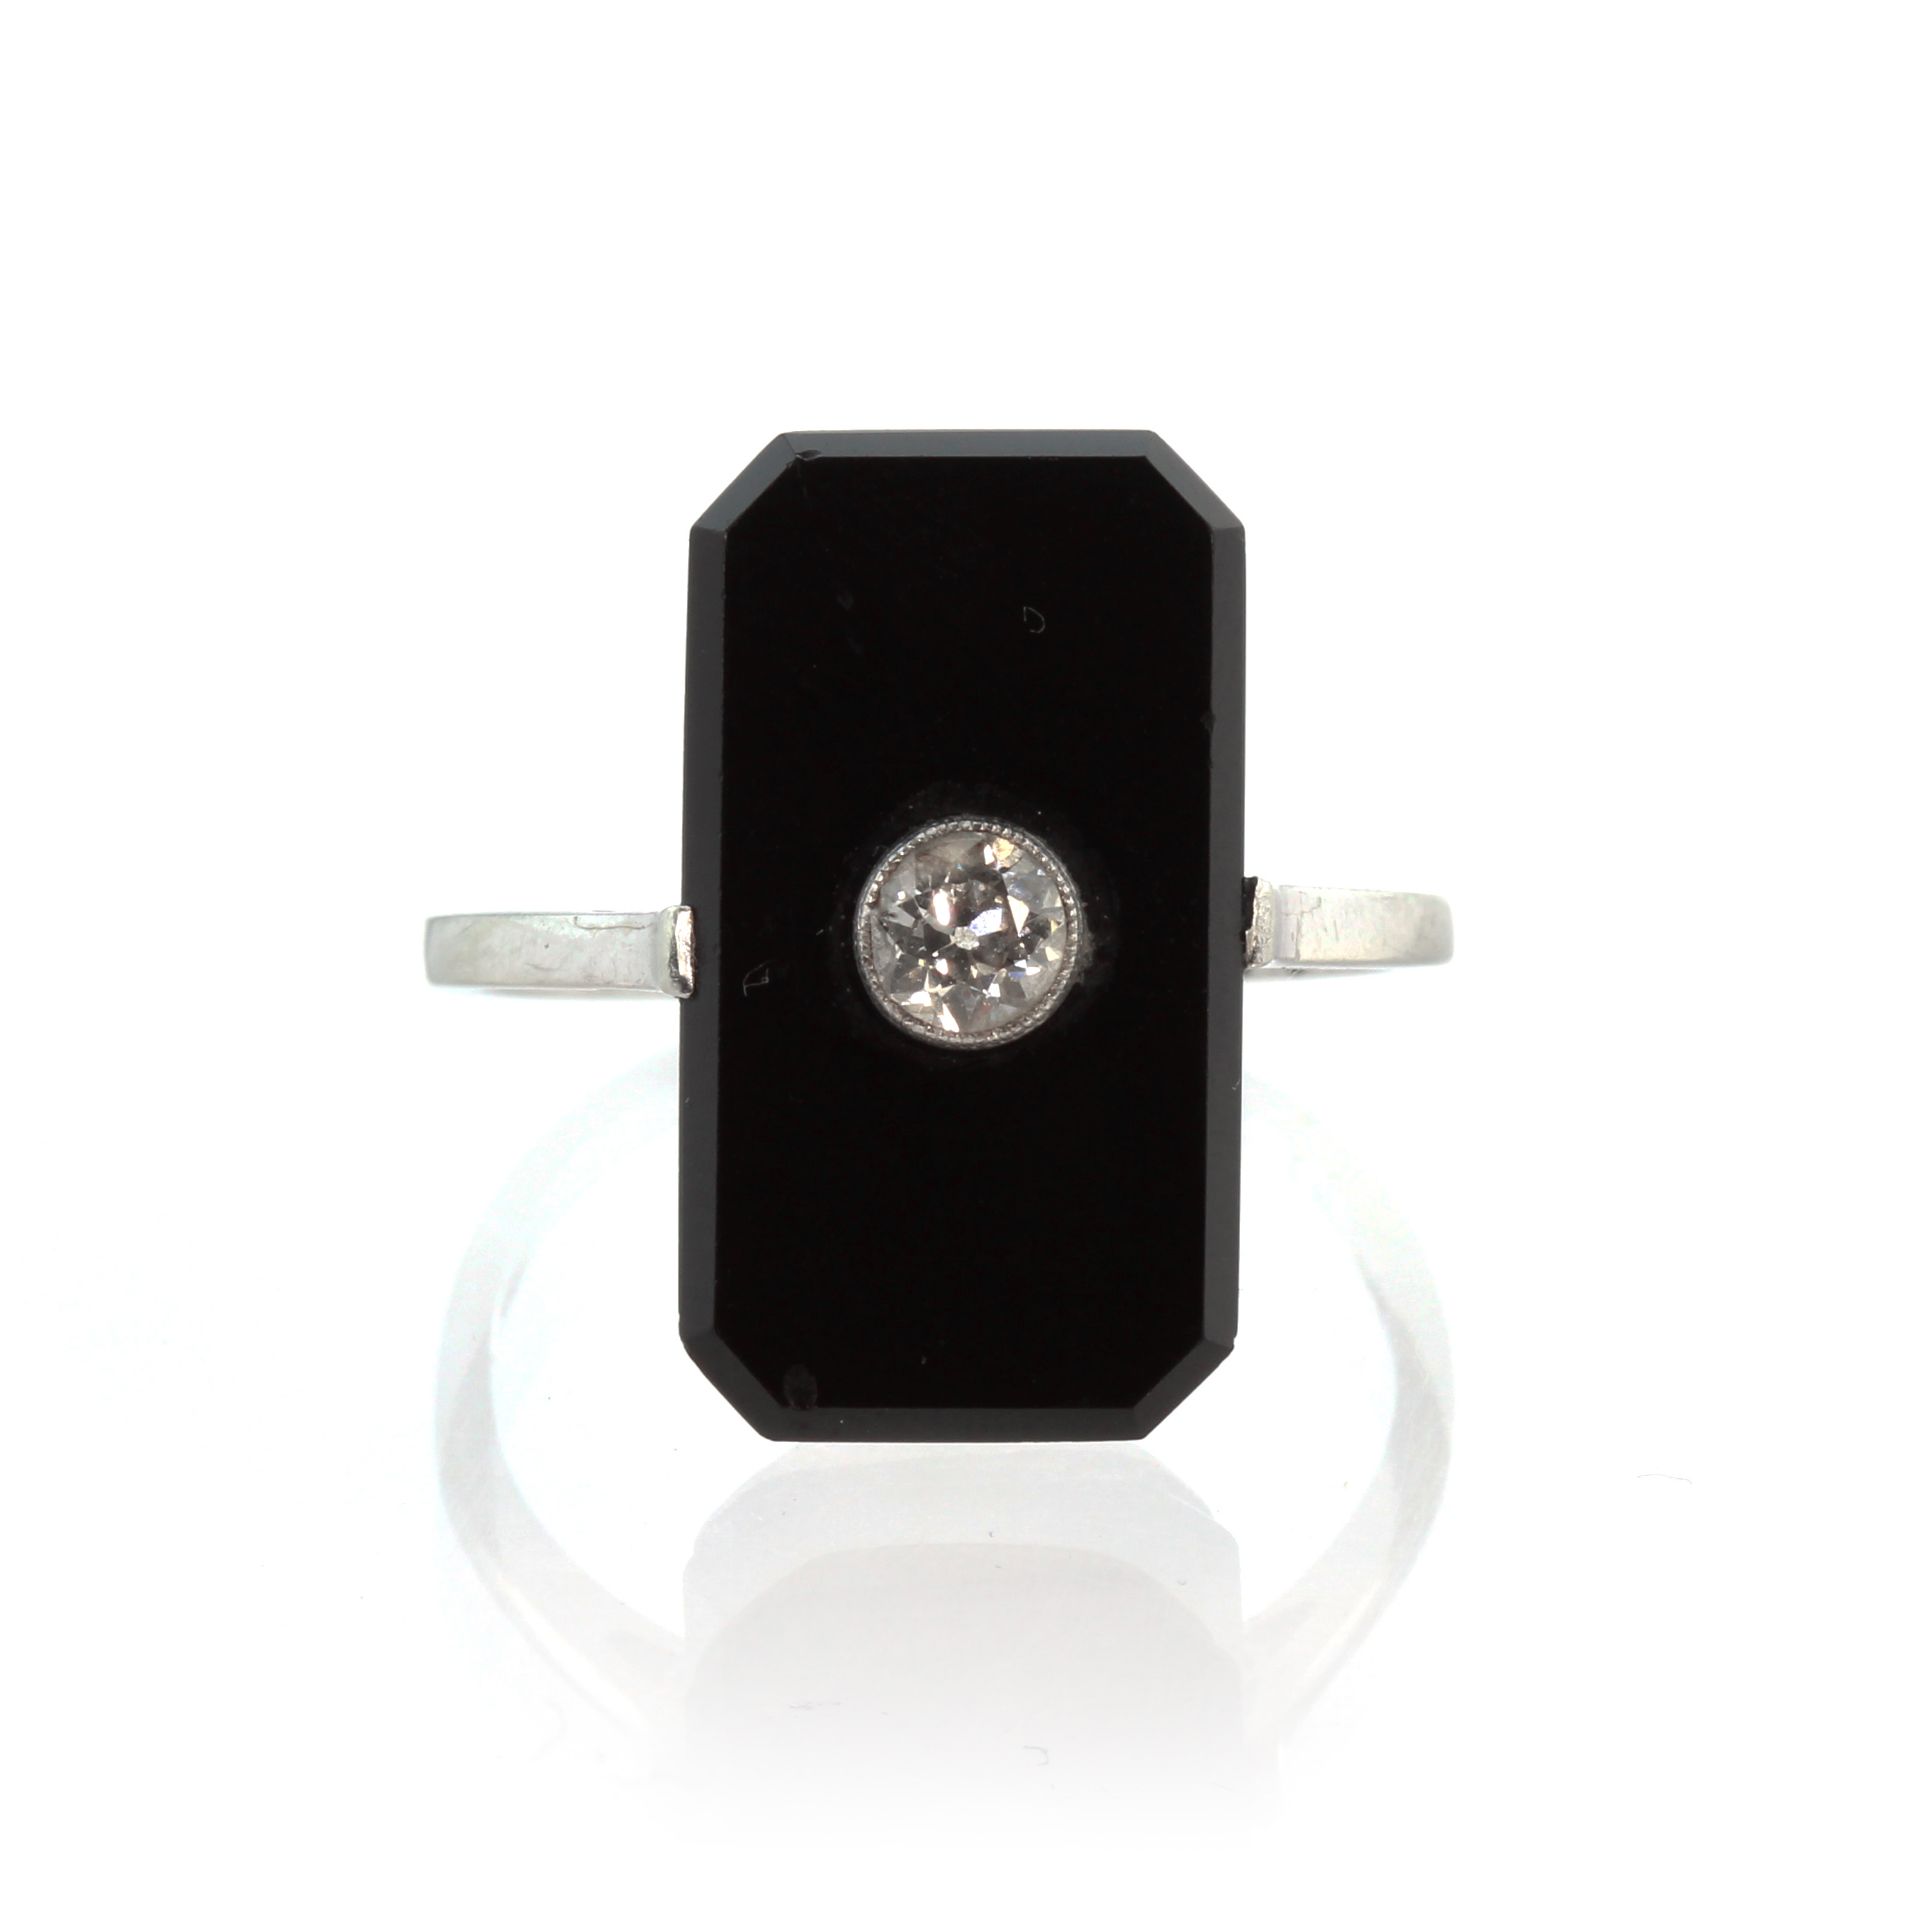 An antique Art Deco onyx and diamond dress ring in 18ct white gold and platinum designed as an